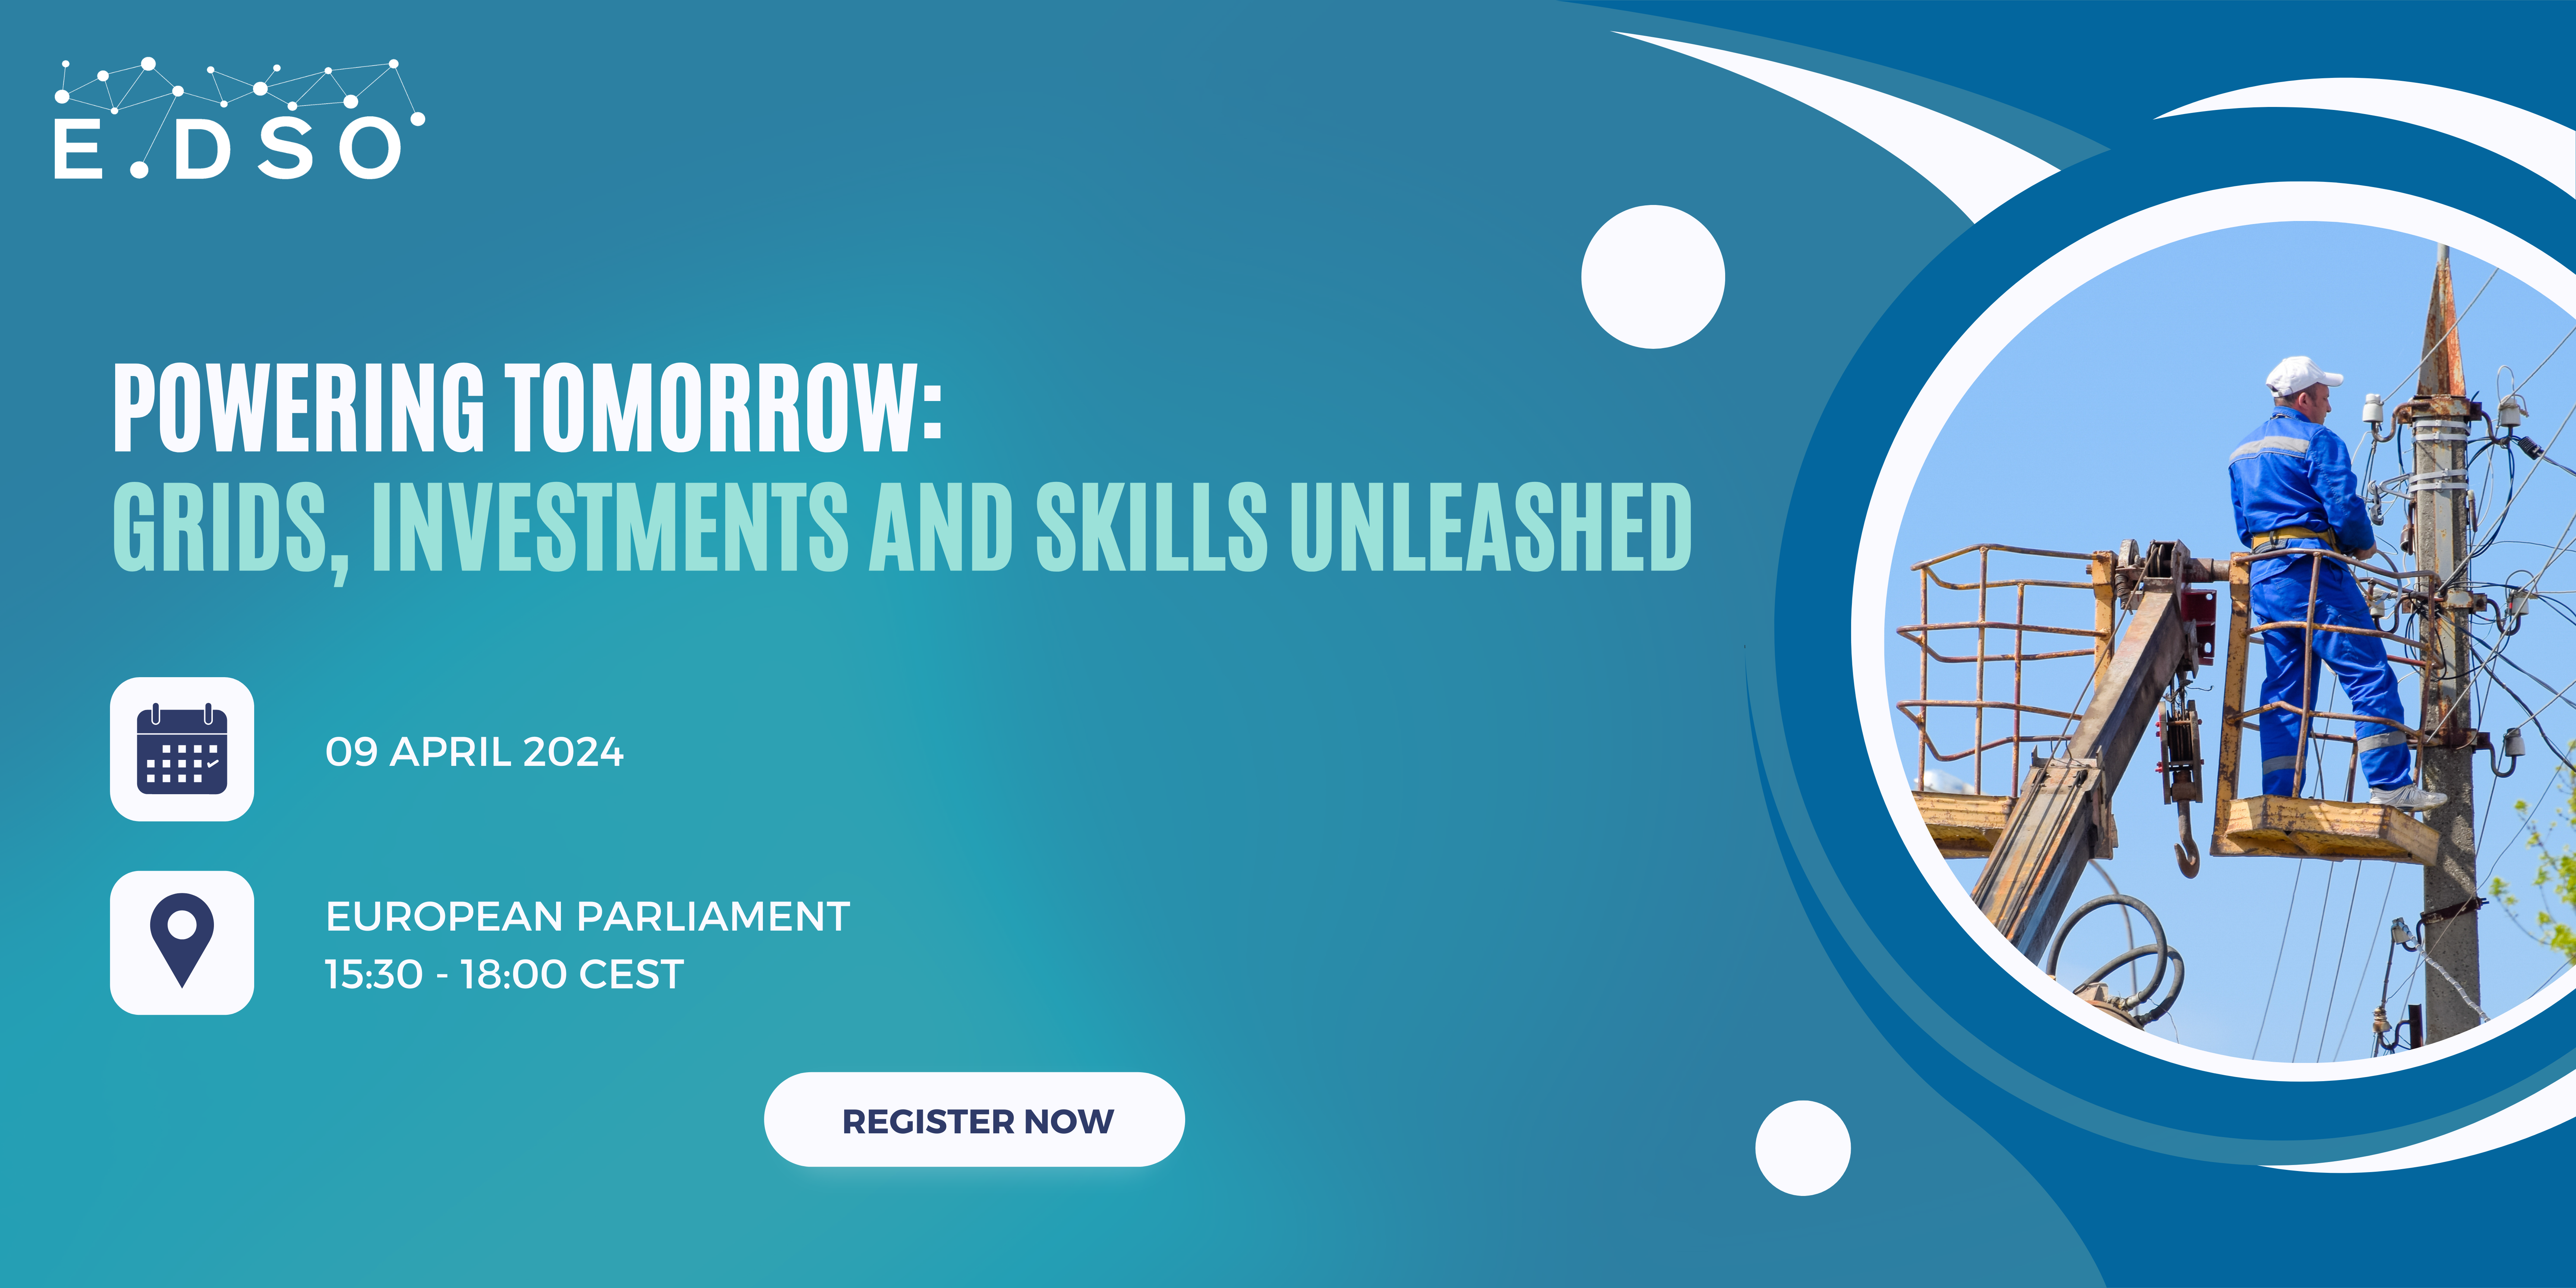 Event report - Powering Tomorrow: Grids, Investments, And Skills Unleashed